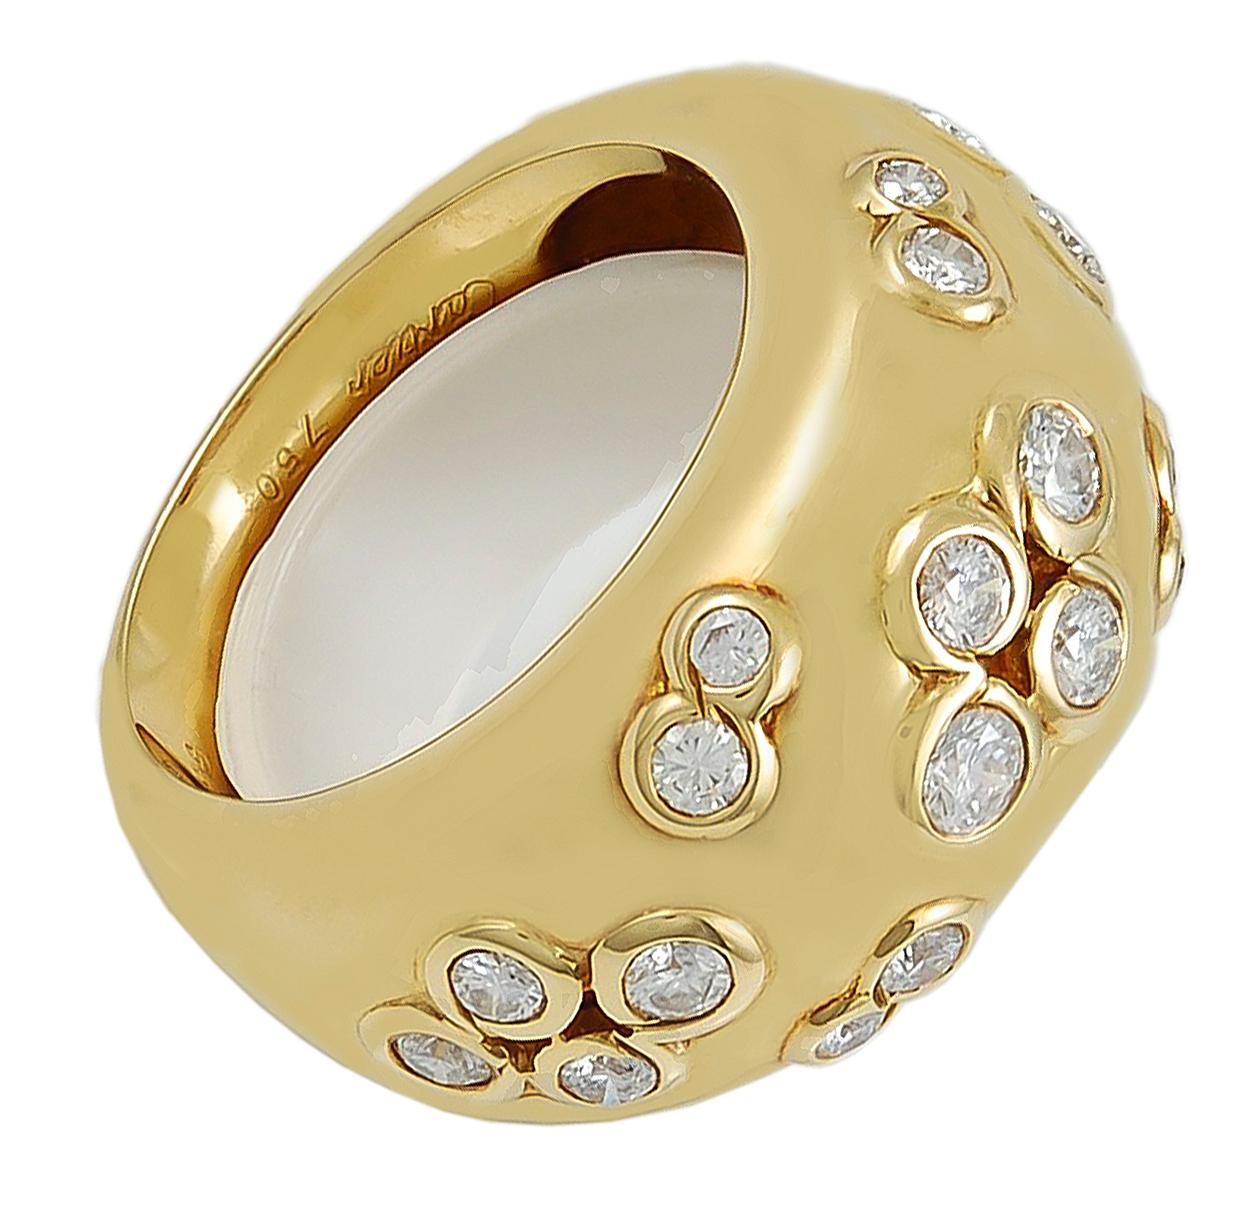 A luminous ring by Cartier crafted in 18k yellow gold with several clusters of round cut diamonds throughout.
Signed Cartier.
size 55
Condition: Good - Previously owned and gently worn, with little signs of use. May show light scratches but has no